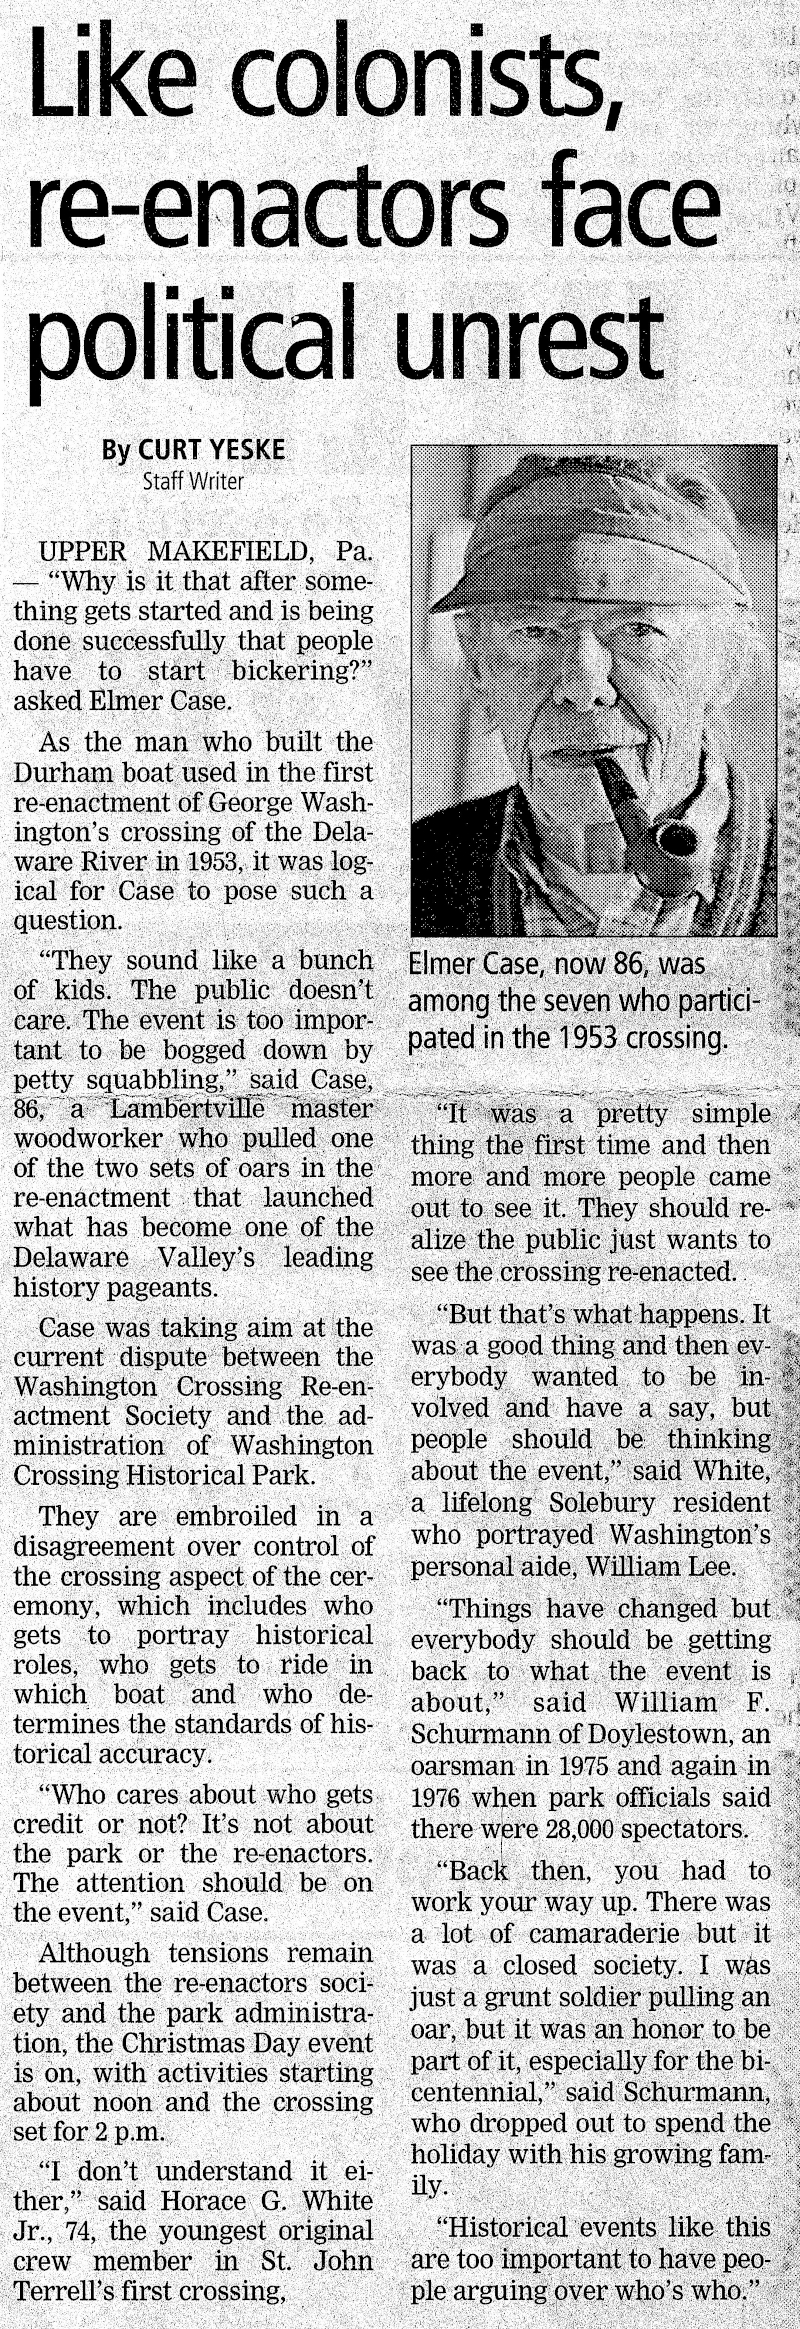 Article about Elmer Case in the Trenton Times